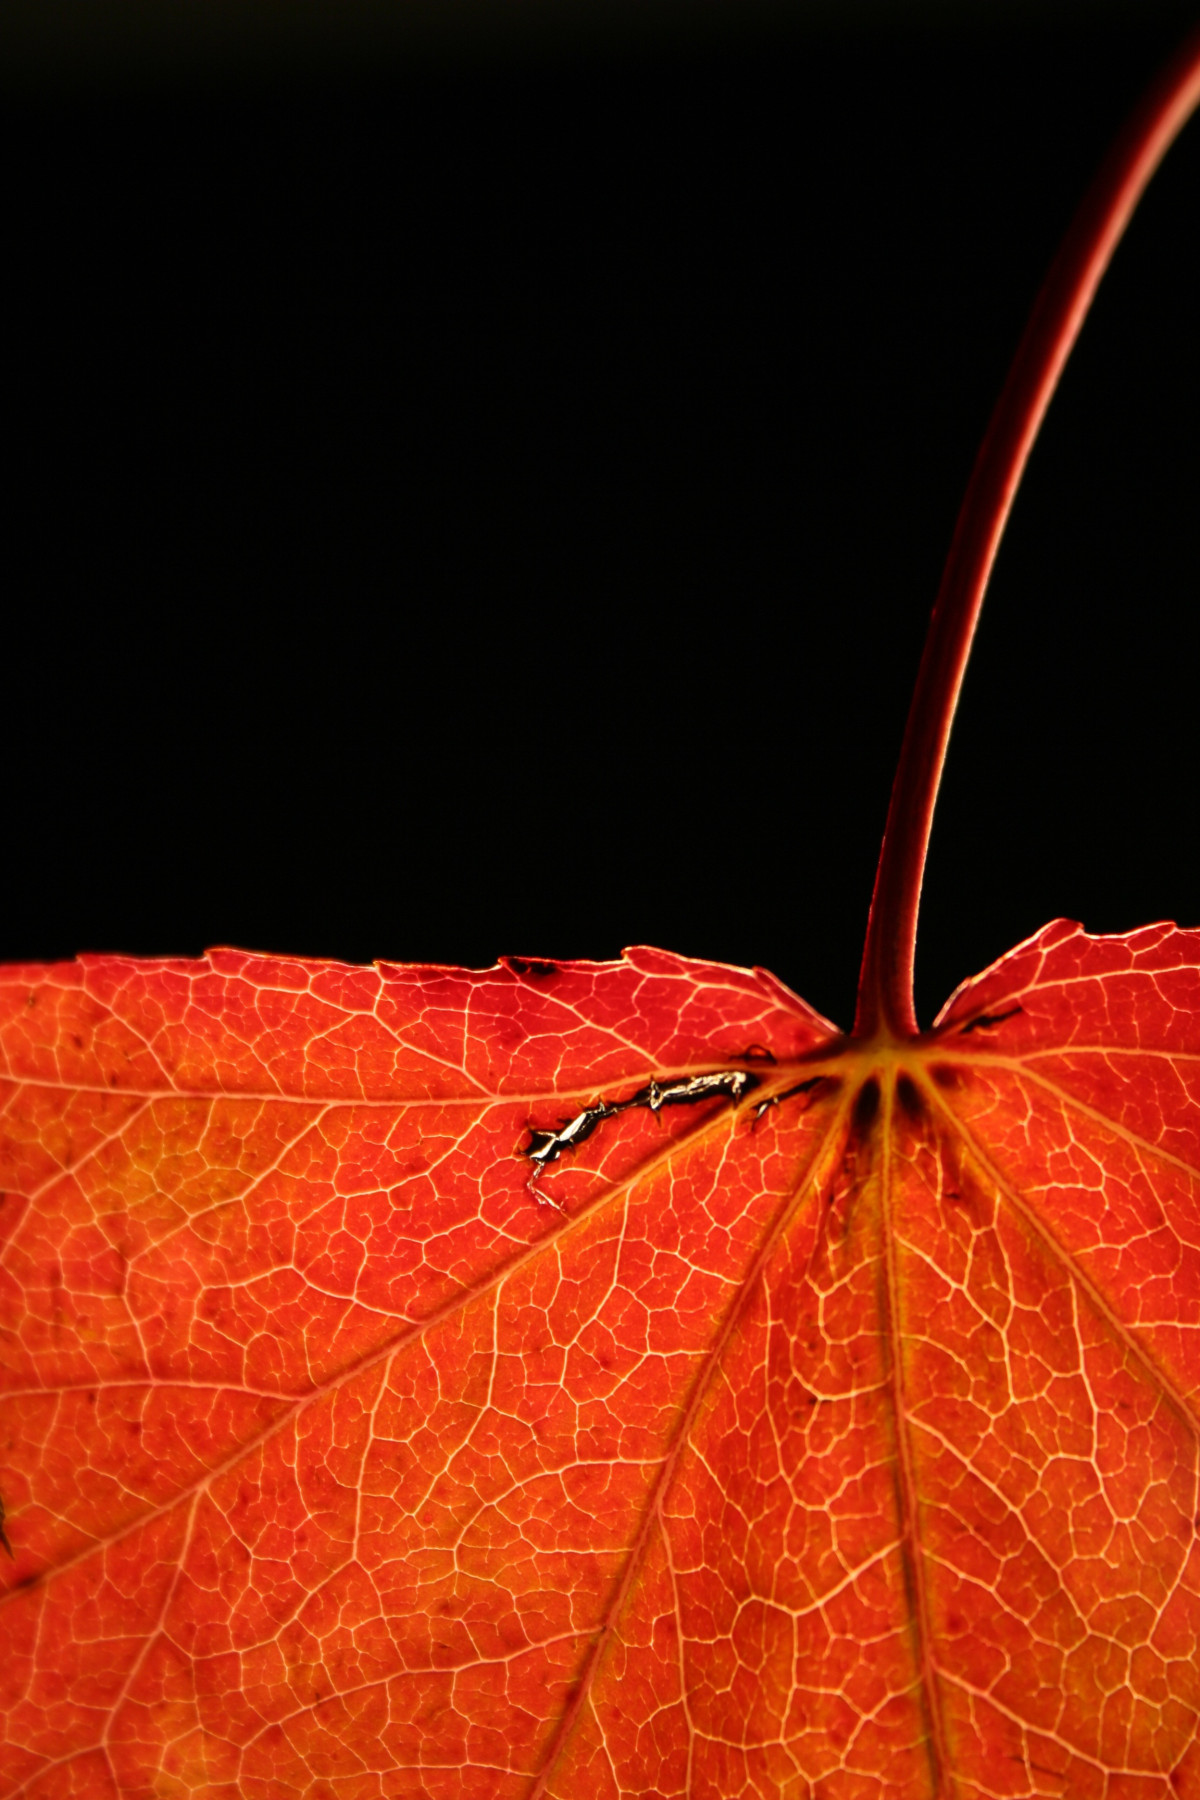 tree, nature, branch, plant, sunlight, leaf, flower, petal, red, color, autumn, close, season, maple tree, maple leaf, close up, leaves, veins, macro photography, computer wallpaper